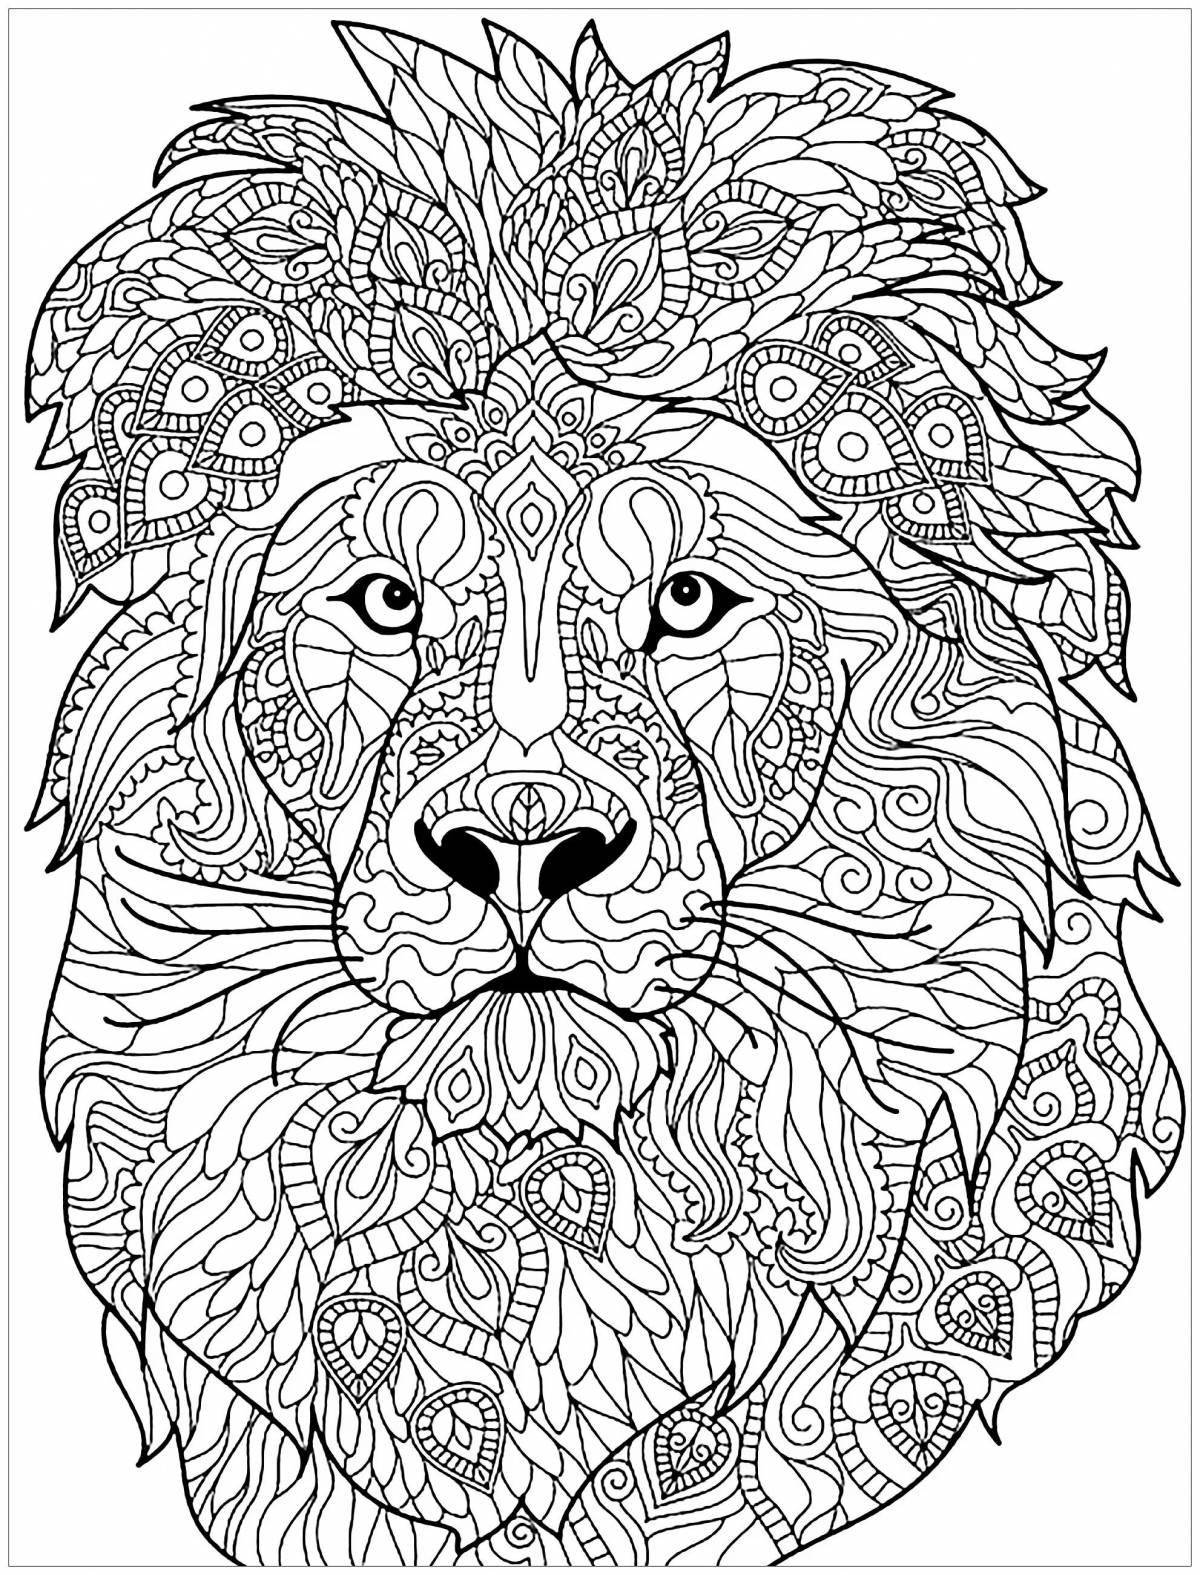 Amazing animal coloring book for girls 12 years old